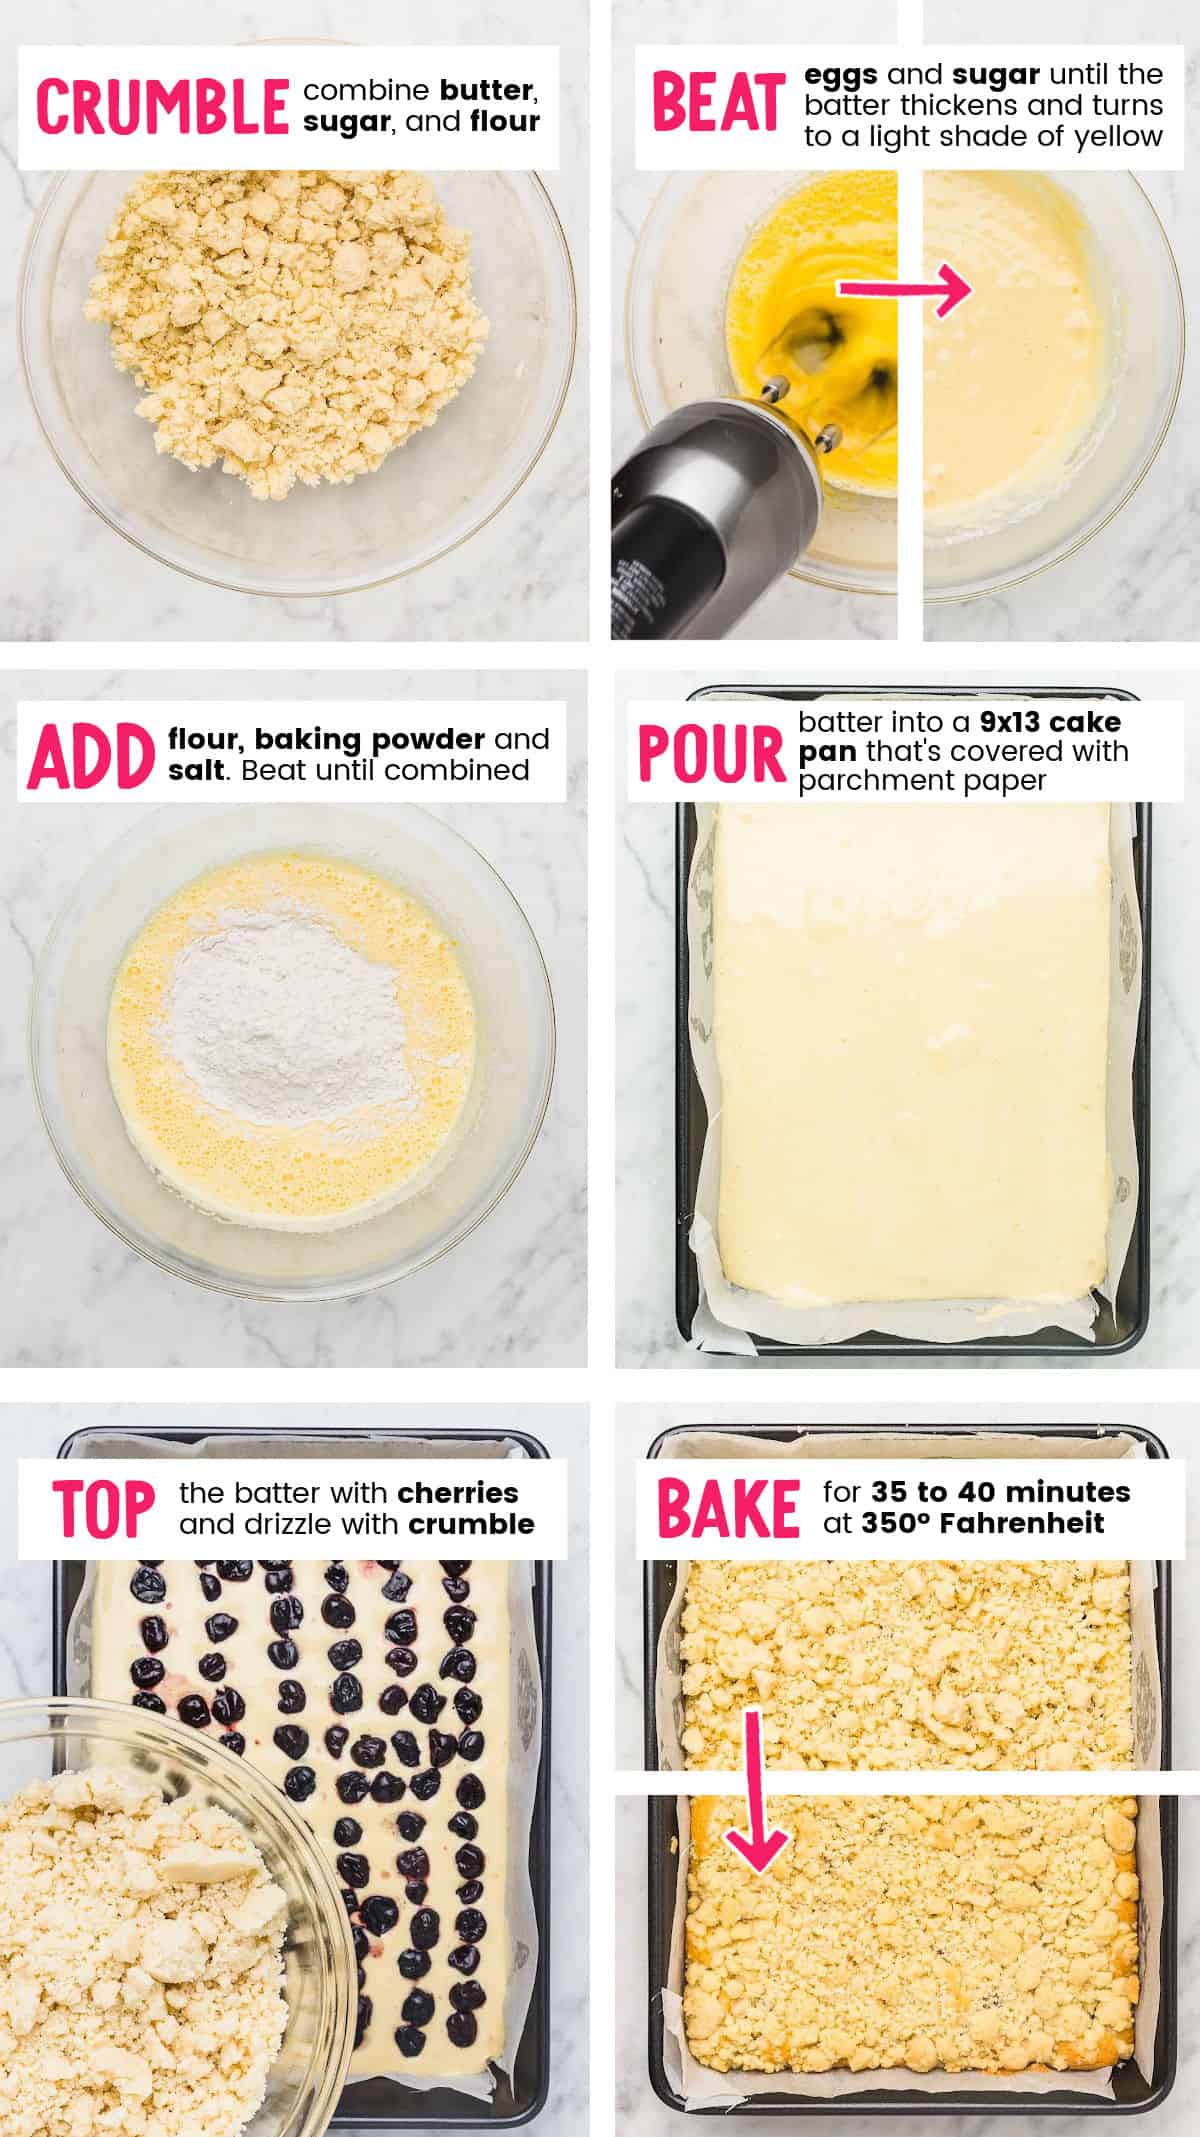 Steps showing how to make a German Cherry Coffe Cake.